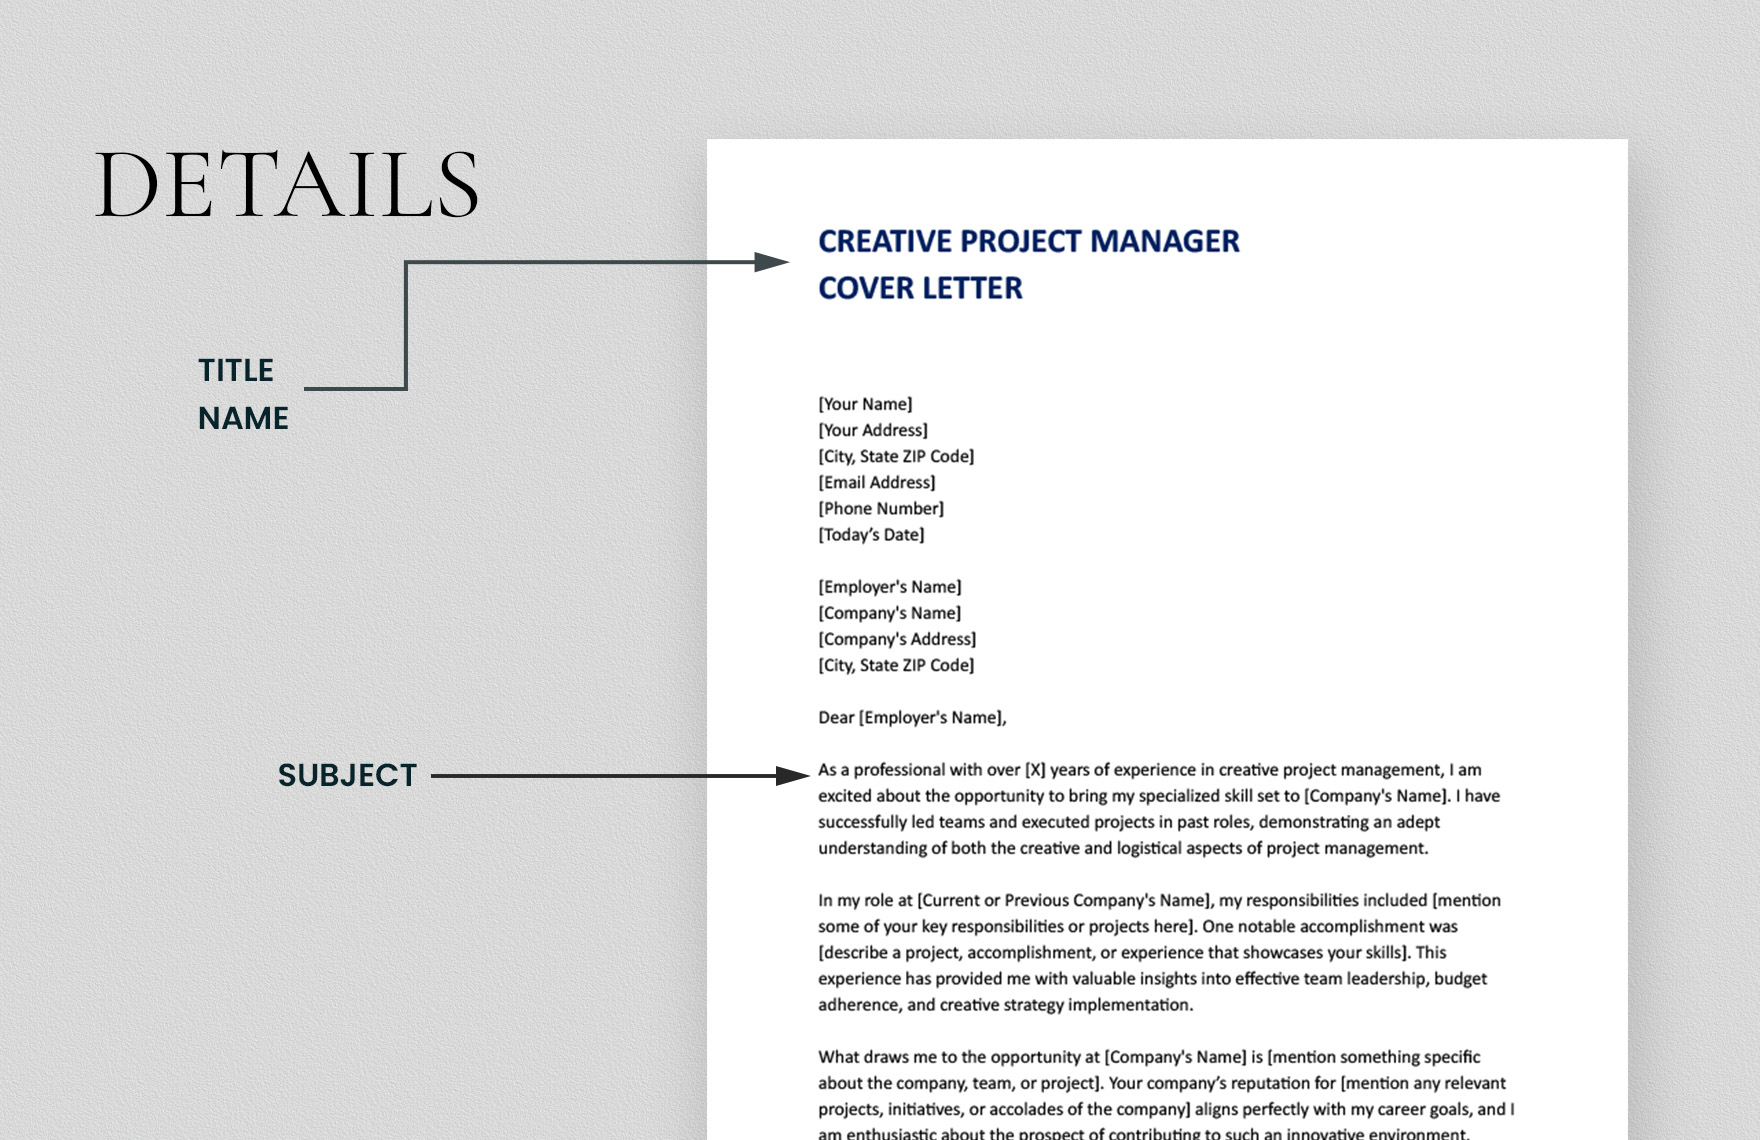 Creative Project Manager Cover Letter